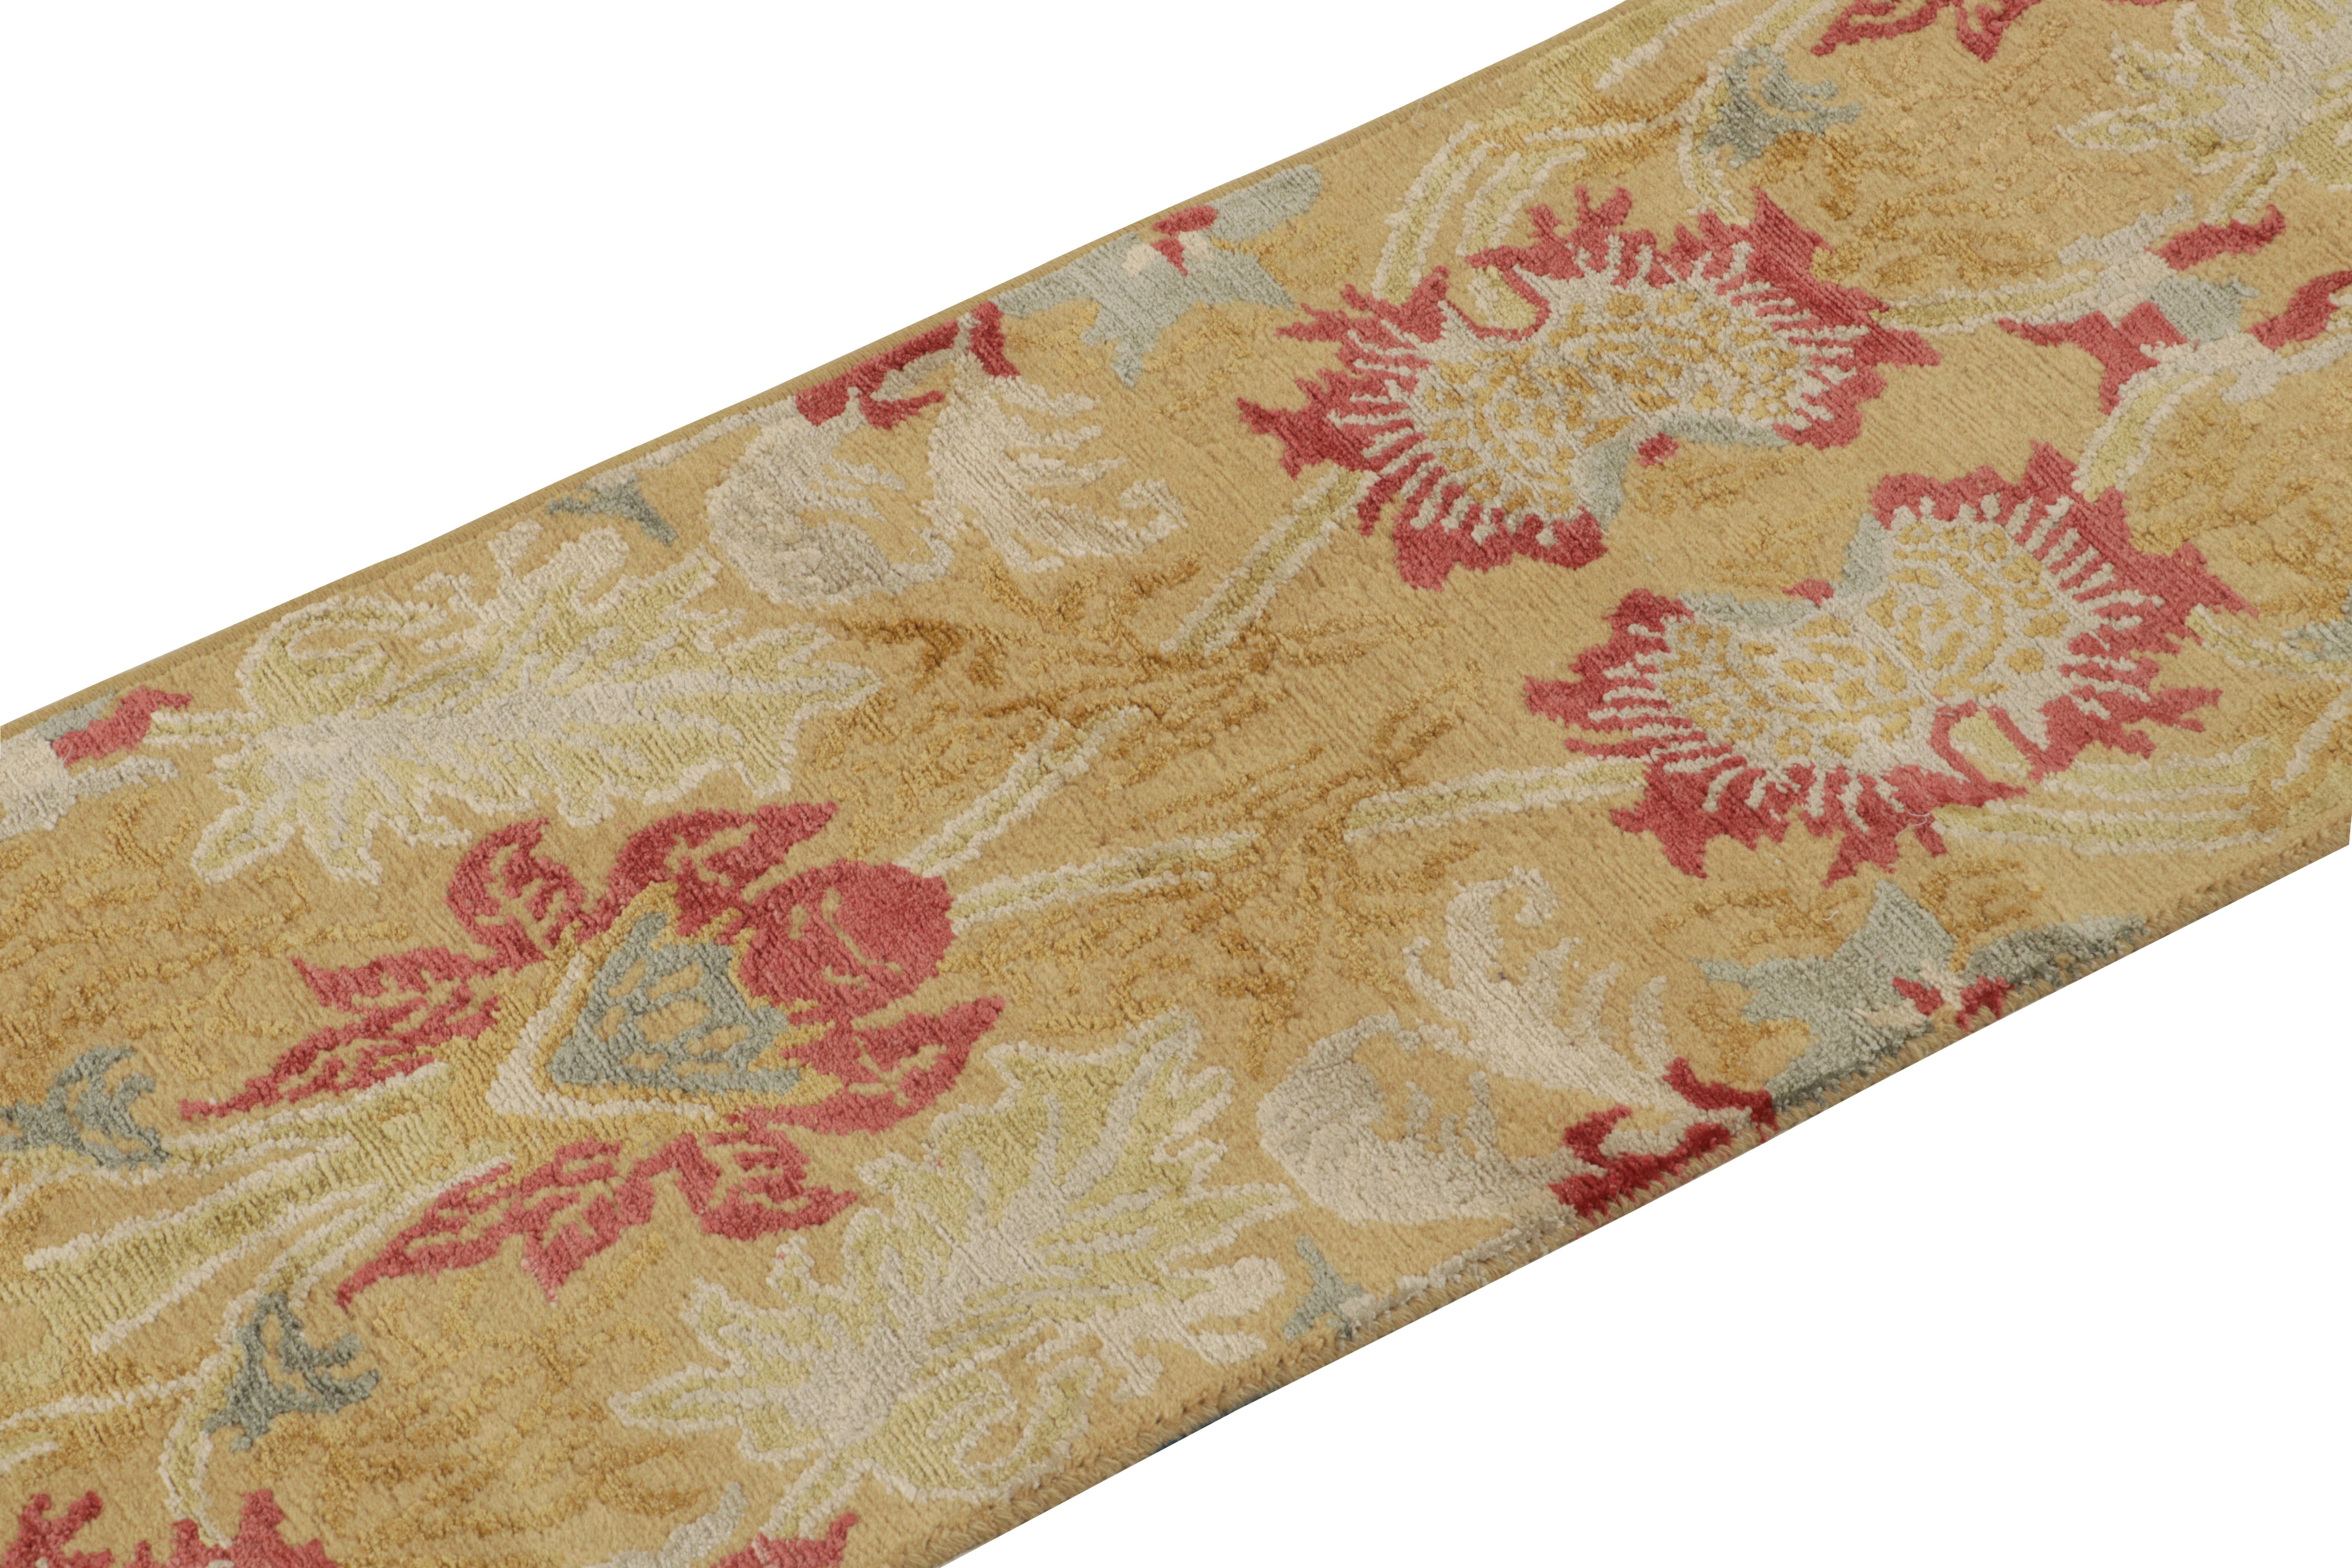 Nepalese Rug & Kilim's Spanish European Style Runner in Gold, Red & Blue Floral Pattern For Sale